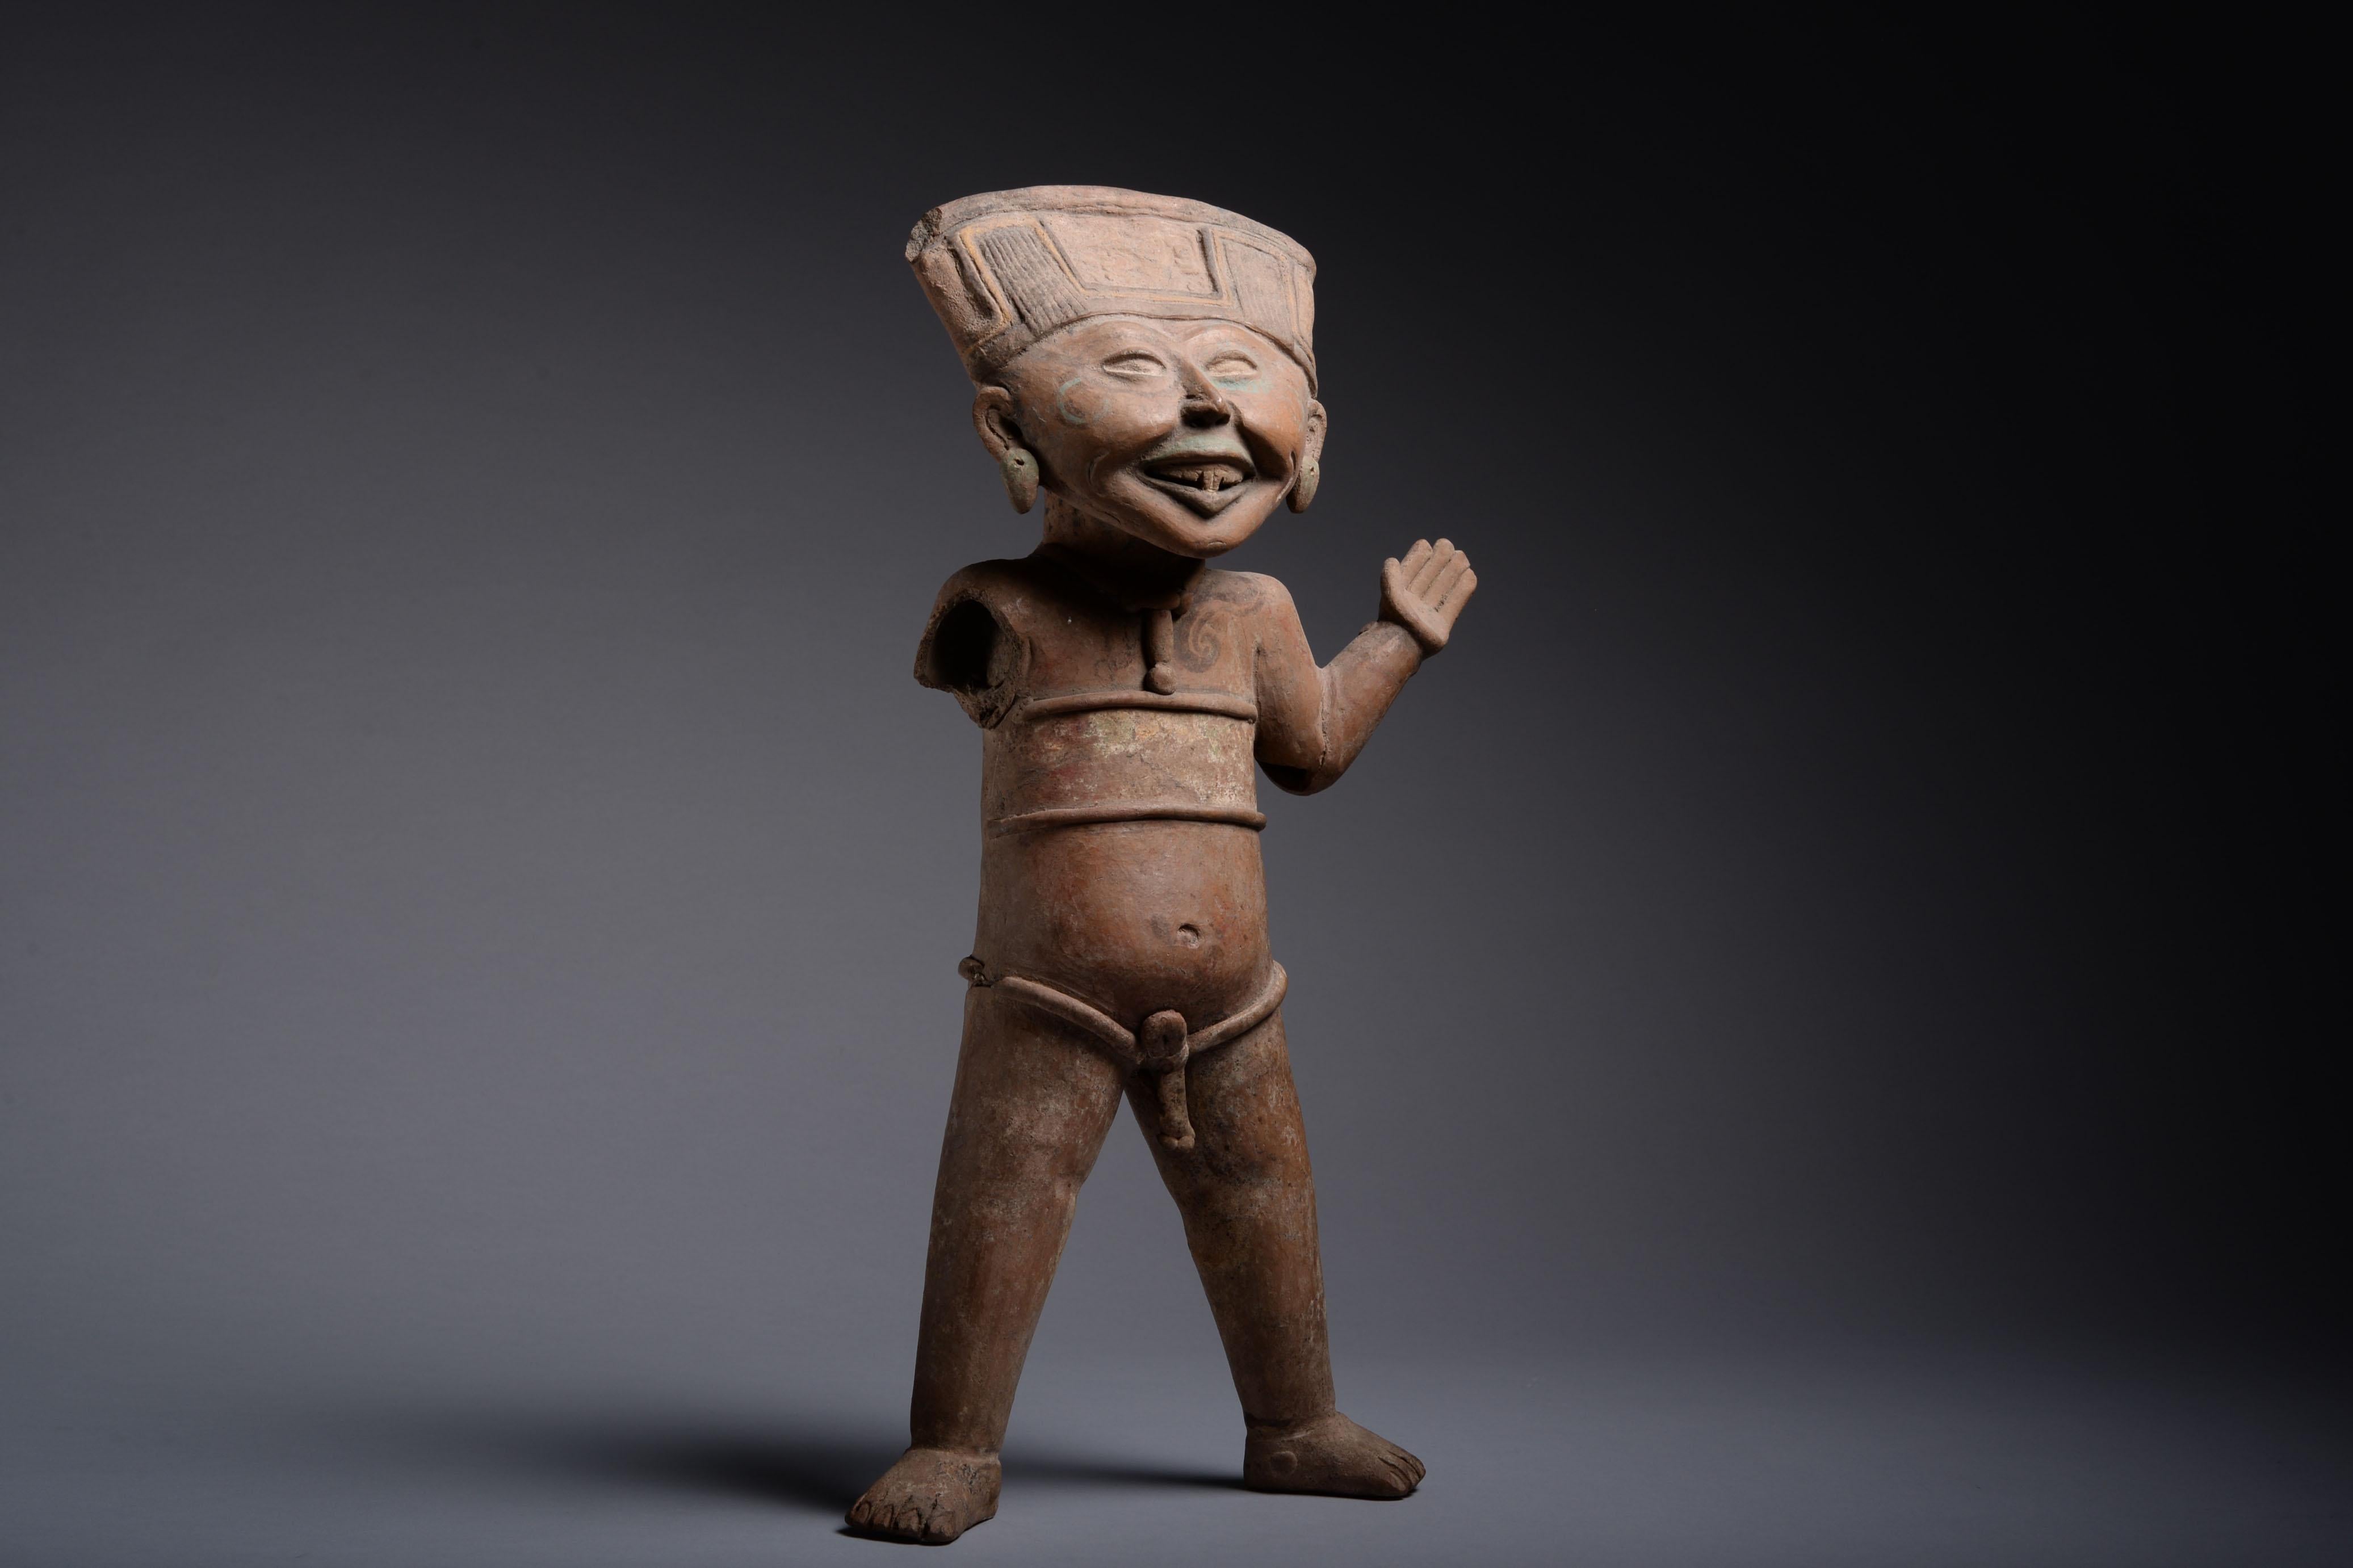 Pre-Columbian pottery laughing figure from the collection of Stanley Joseph Seeger (1930-2011). 

From Veracruz, Mexico, dating to 550-950 AD.

The art of ancient Mexico seems to belong to a world apart, and the enigmatic smiling figures of